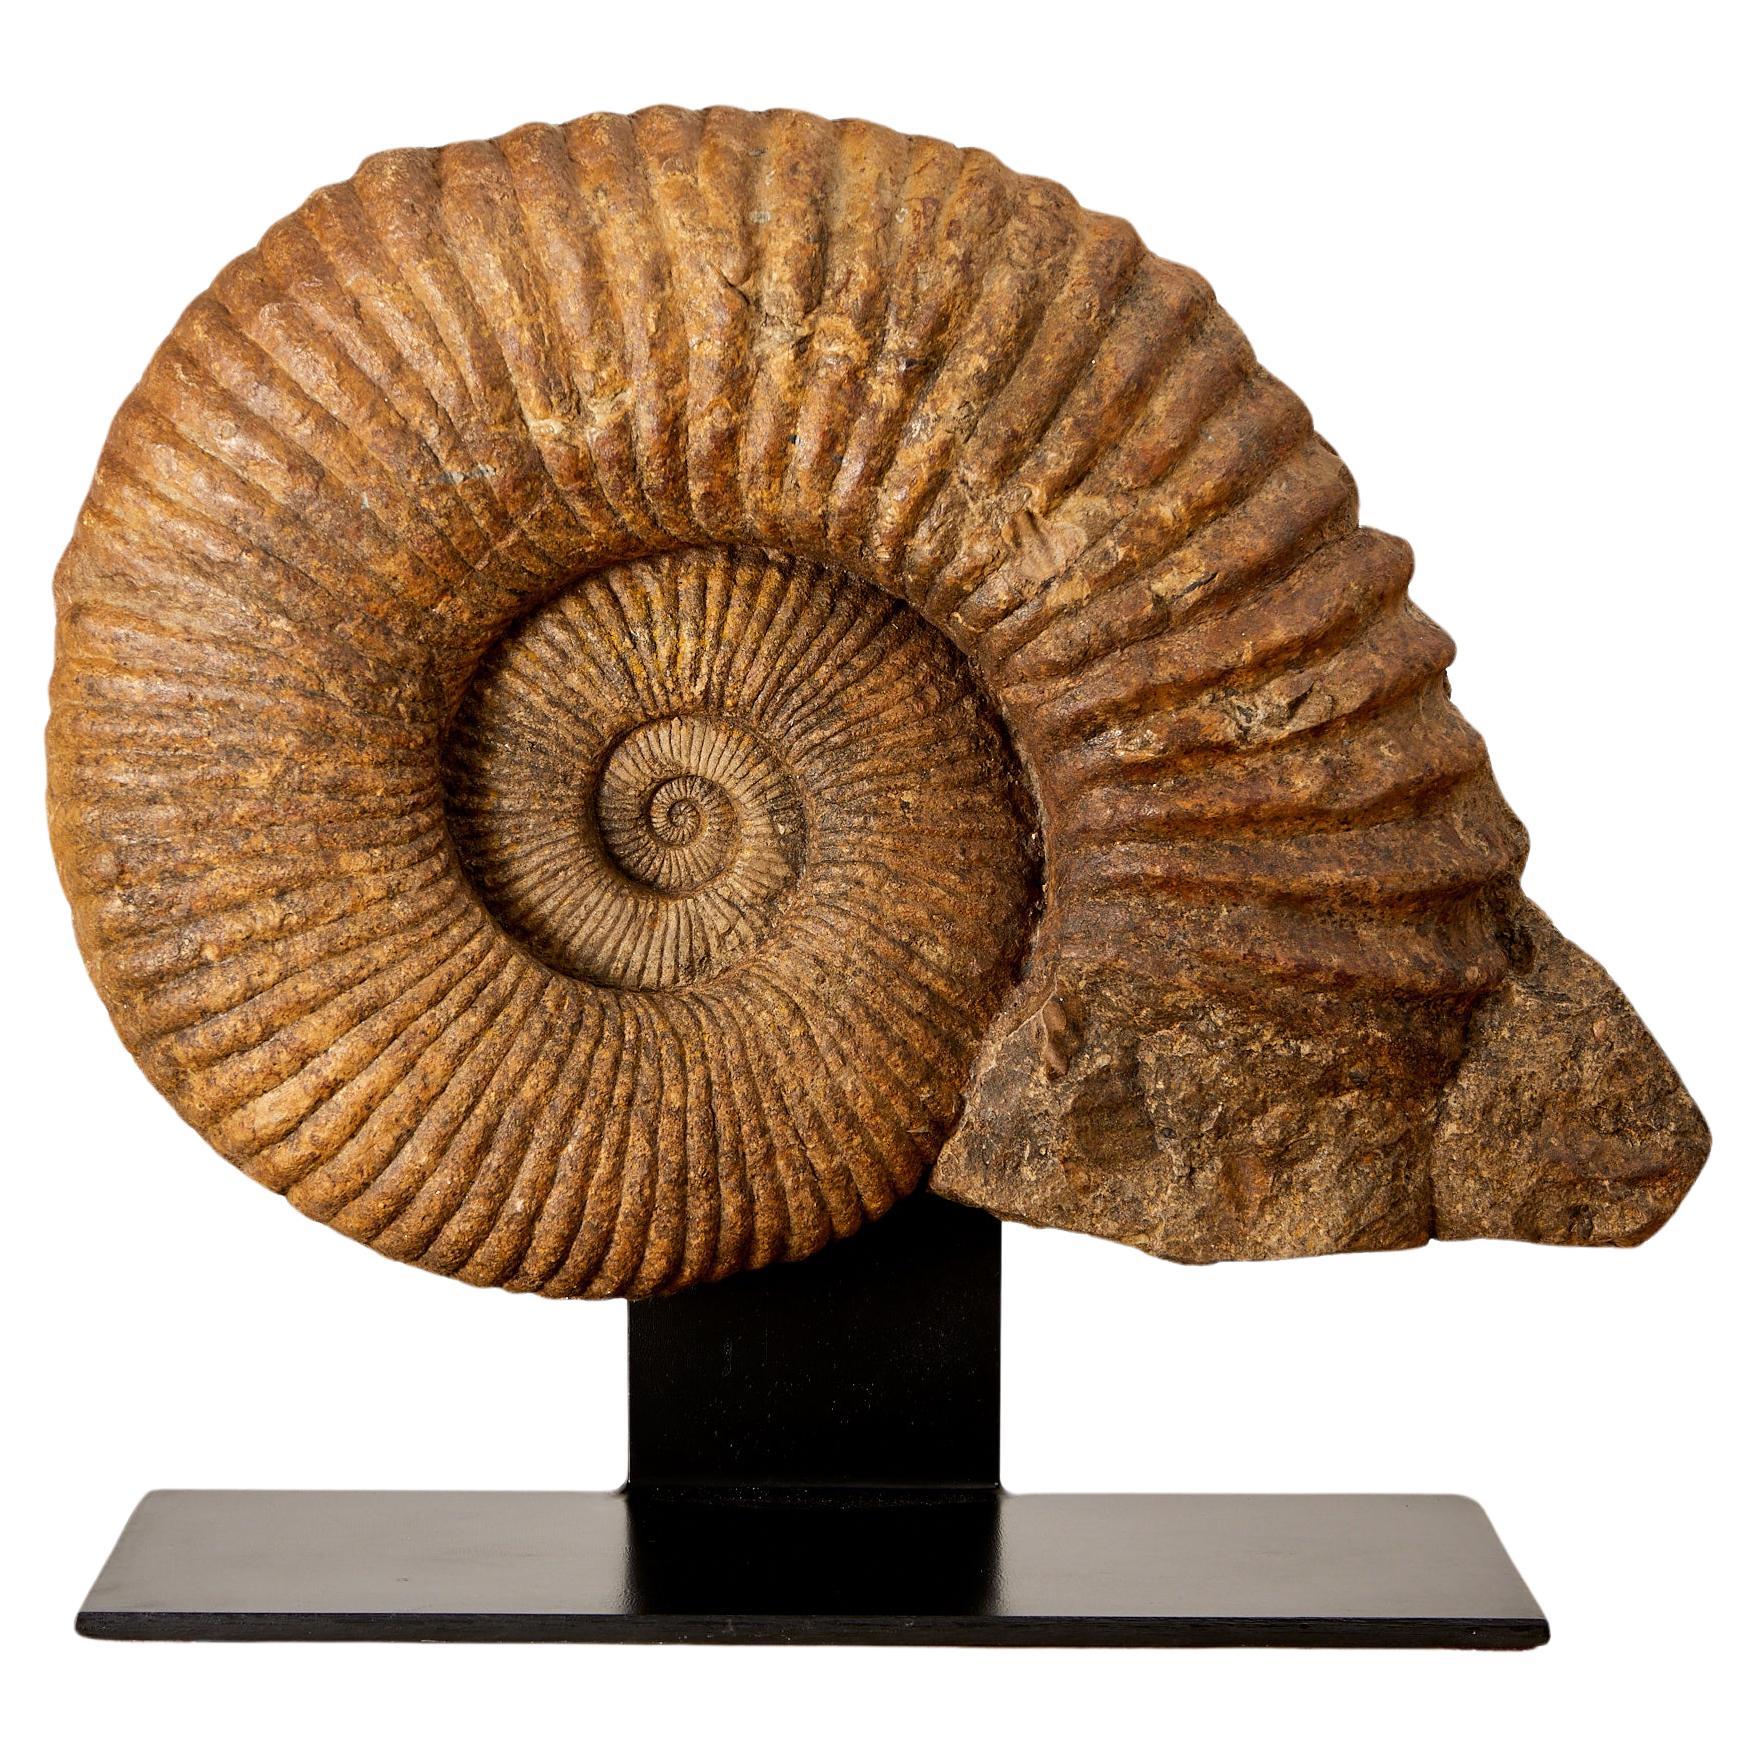 Magnificent fossil, ammonite, approximately 335 million years of existence. For Sale